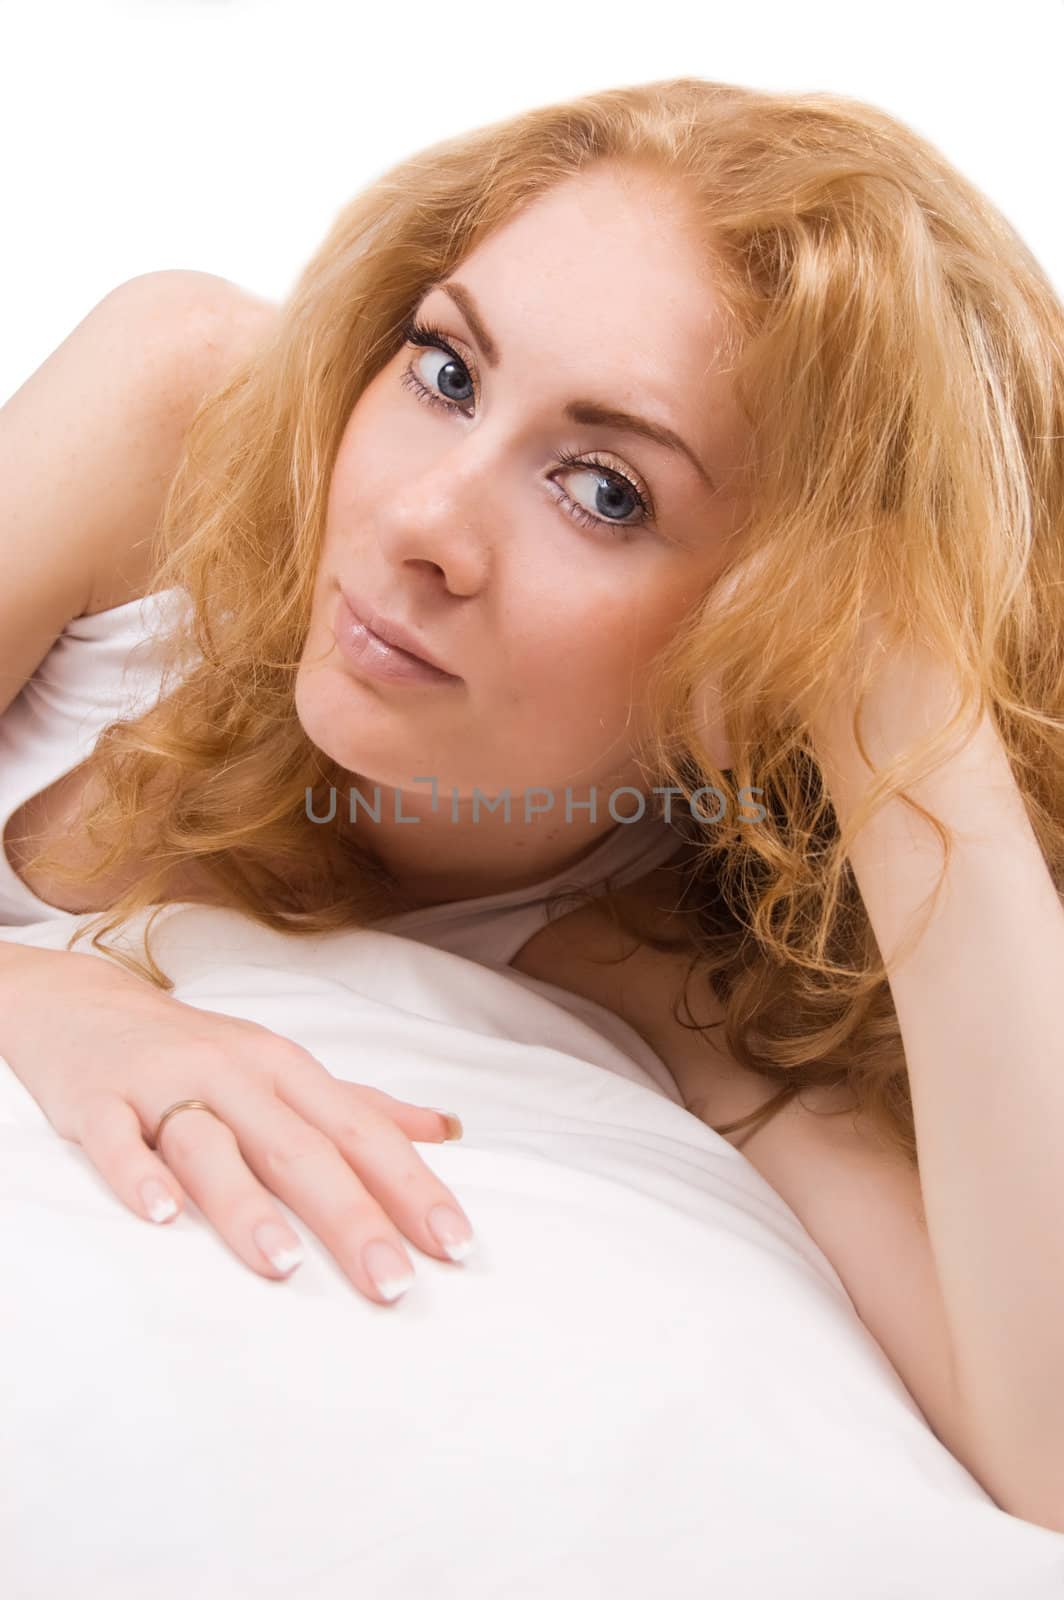 Redheaded woman lying on pillow over white